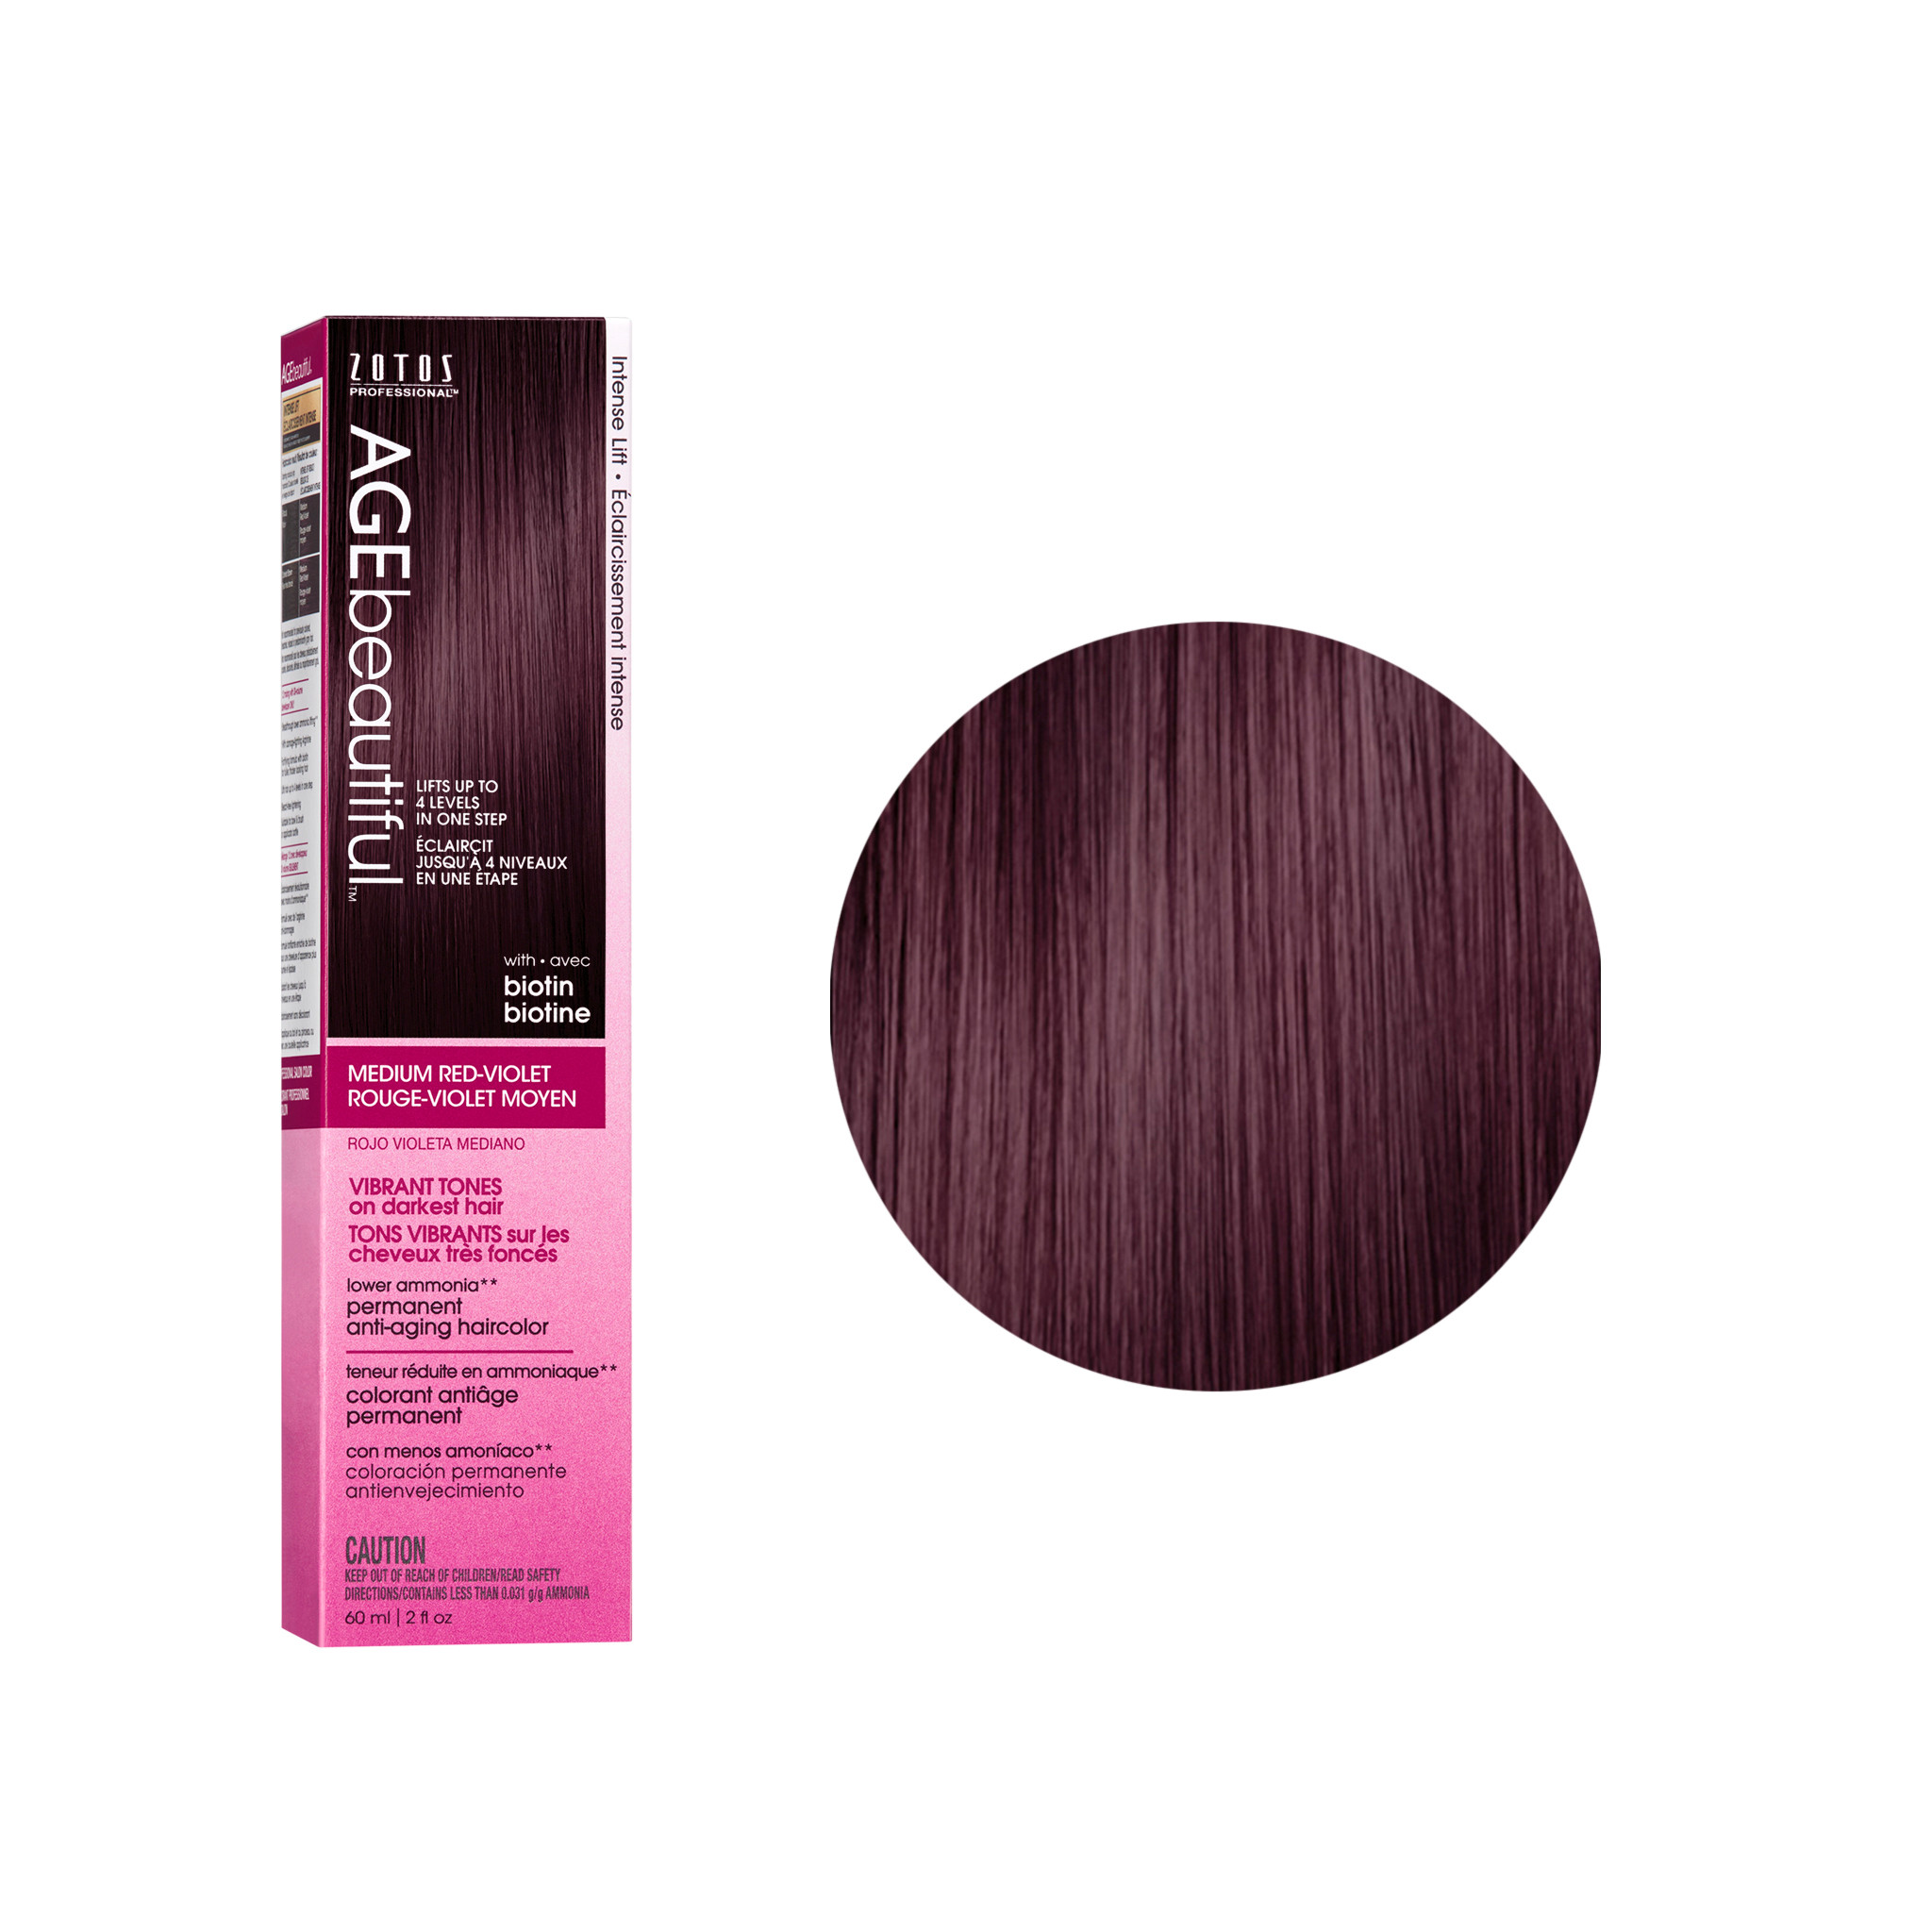 Age Beautiful is the first professional  hair colour solution to combat aging hair. Anti-aging hair colour with 100% grey coverage. Age Beautiful has been formulated using selected key ingredients proven to fight the 5 signs of aging hair. 